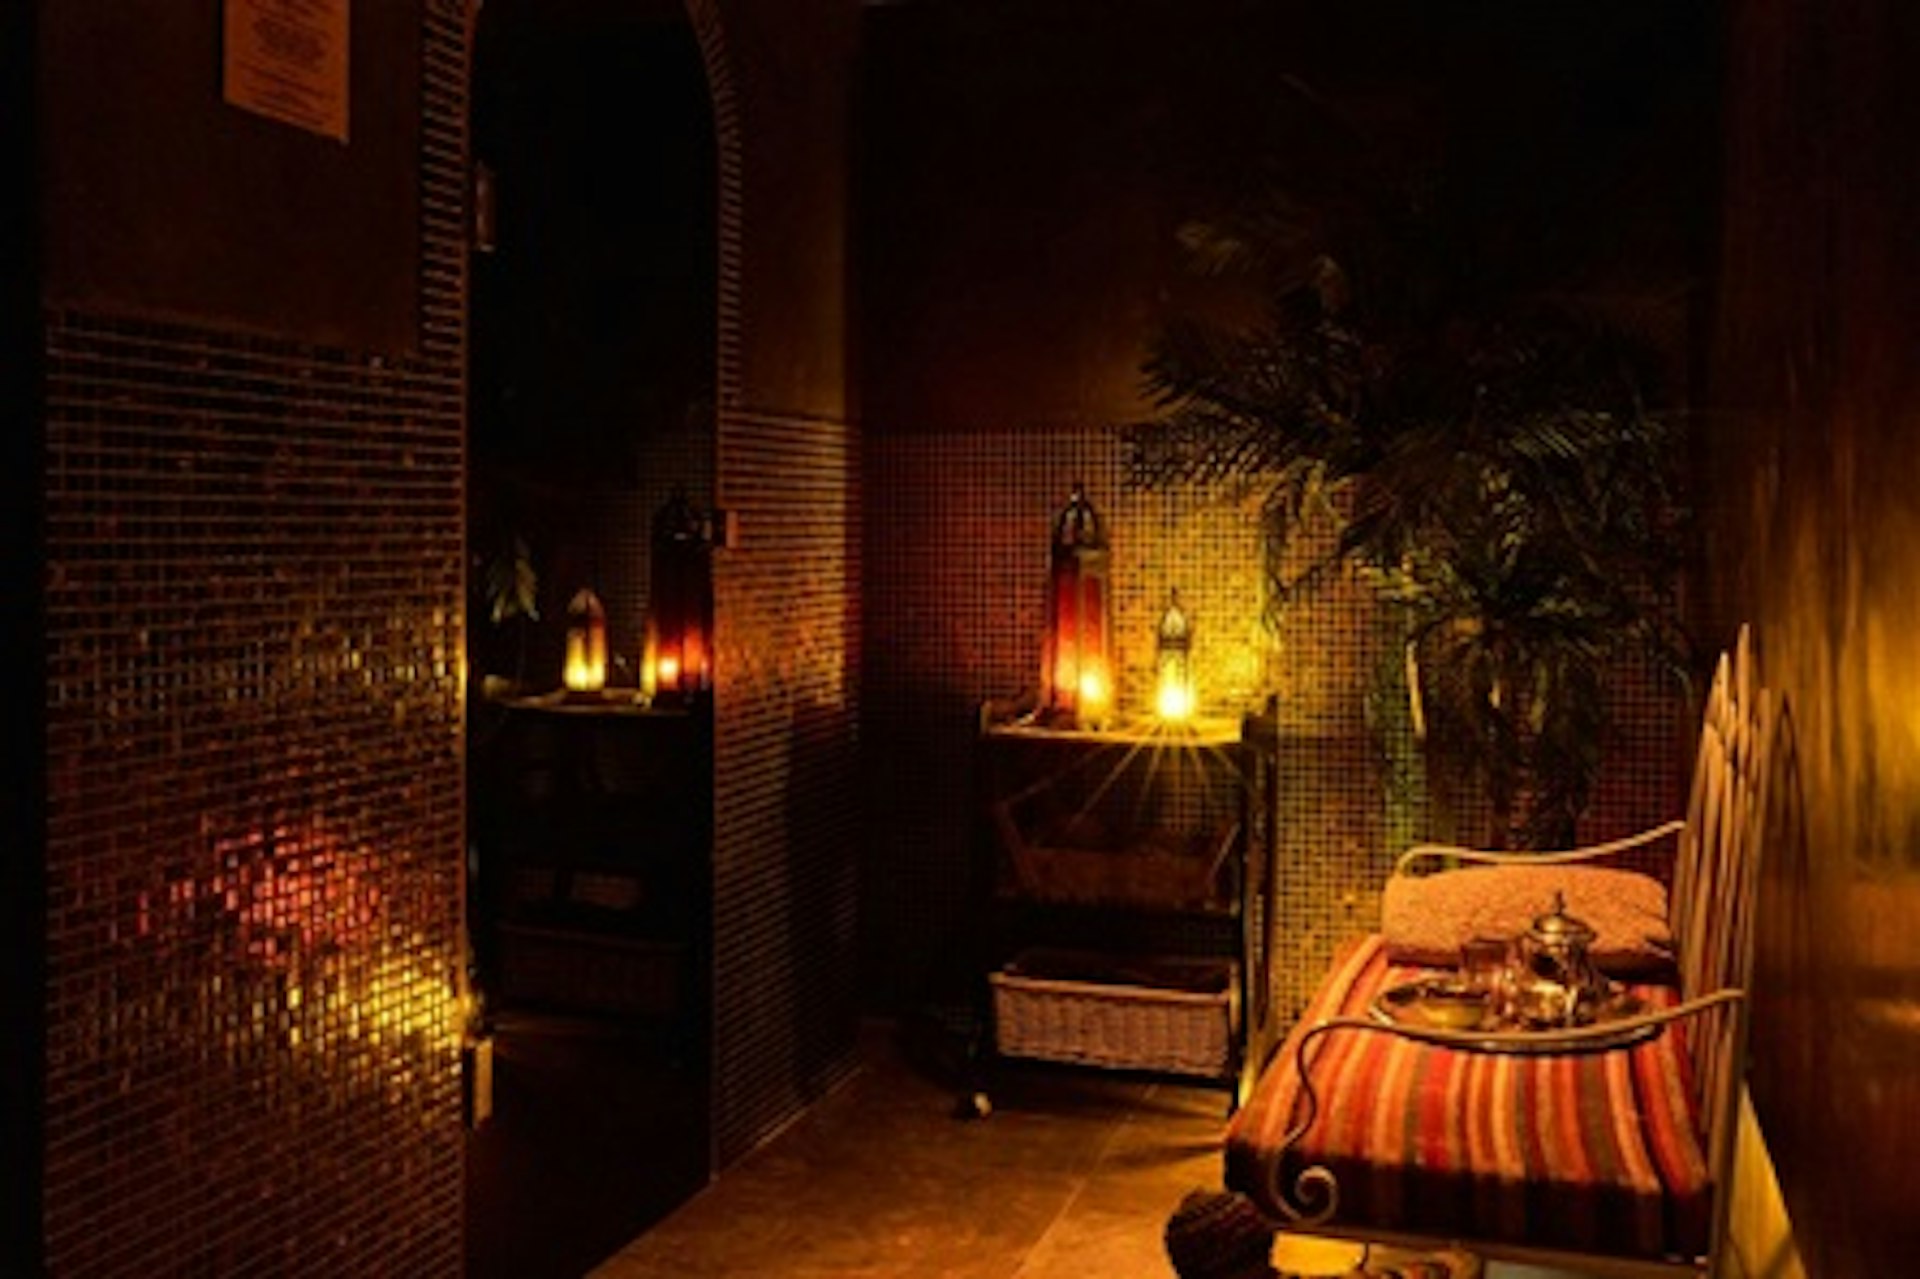 Moroccan Spa Day with Rhassoul and Massage for Two at The Spa in Dolphin Square 2